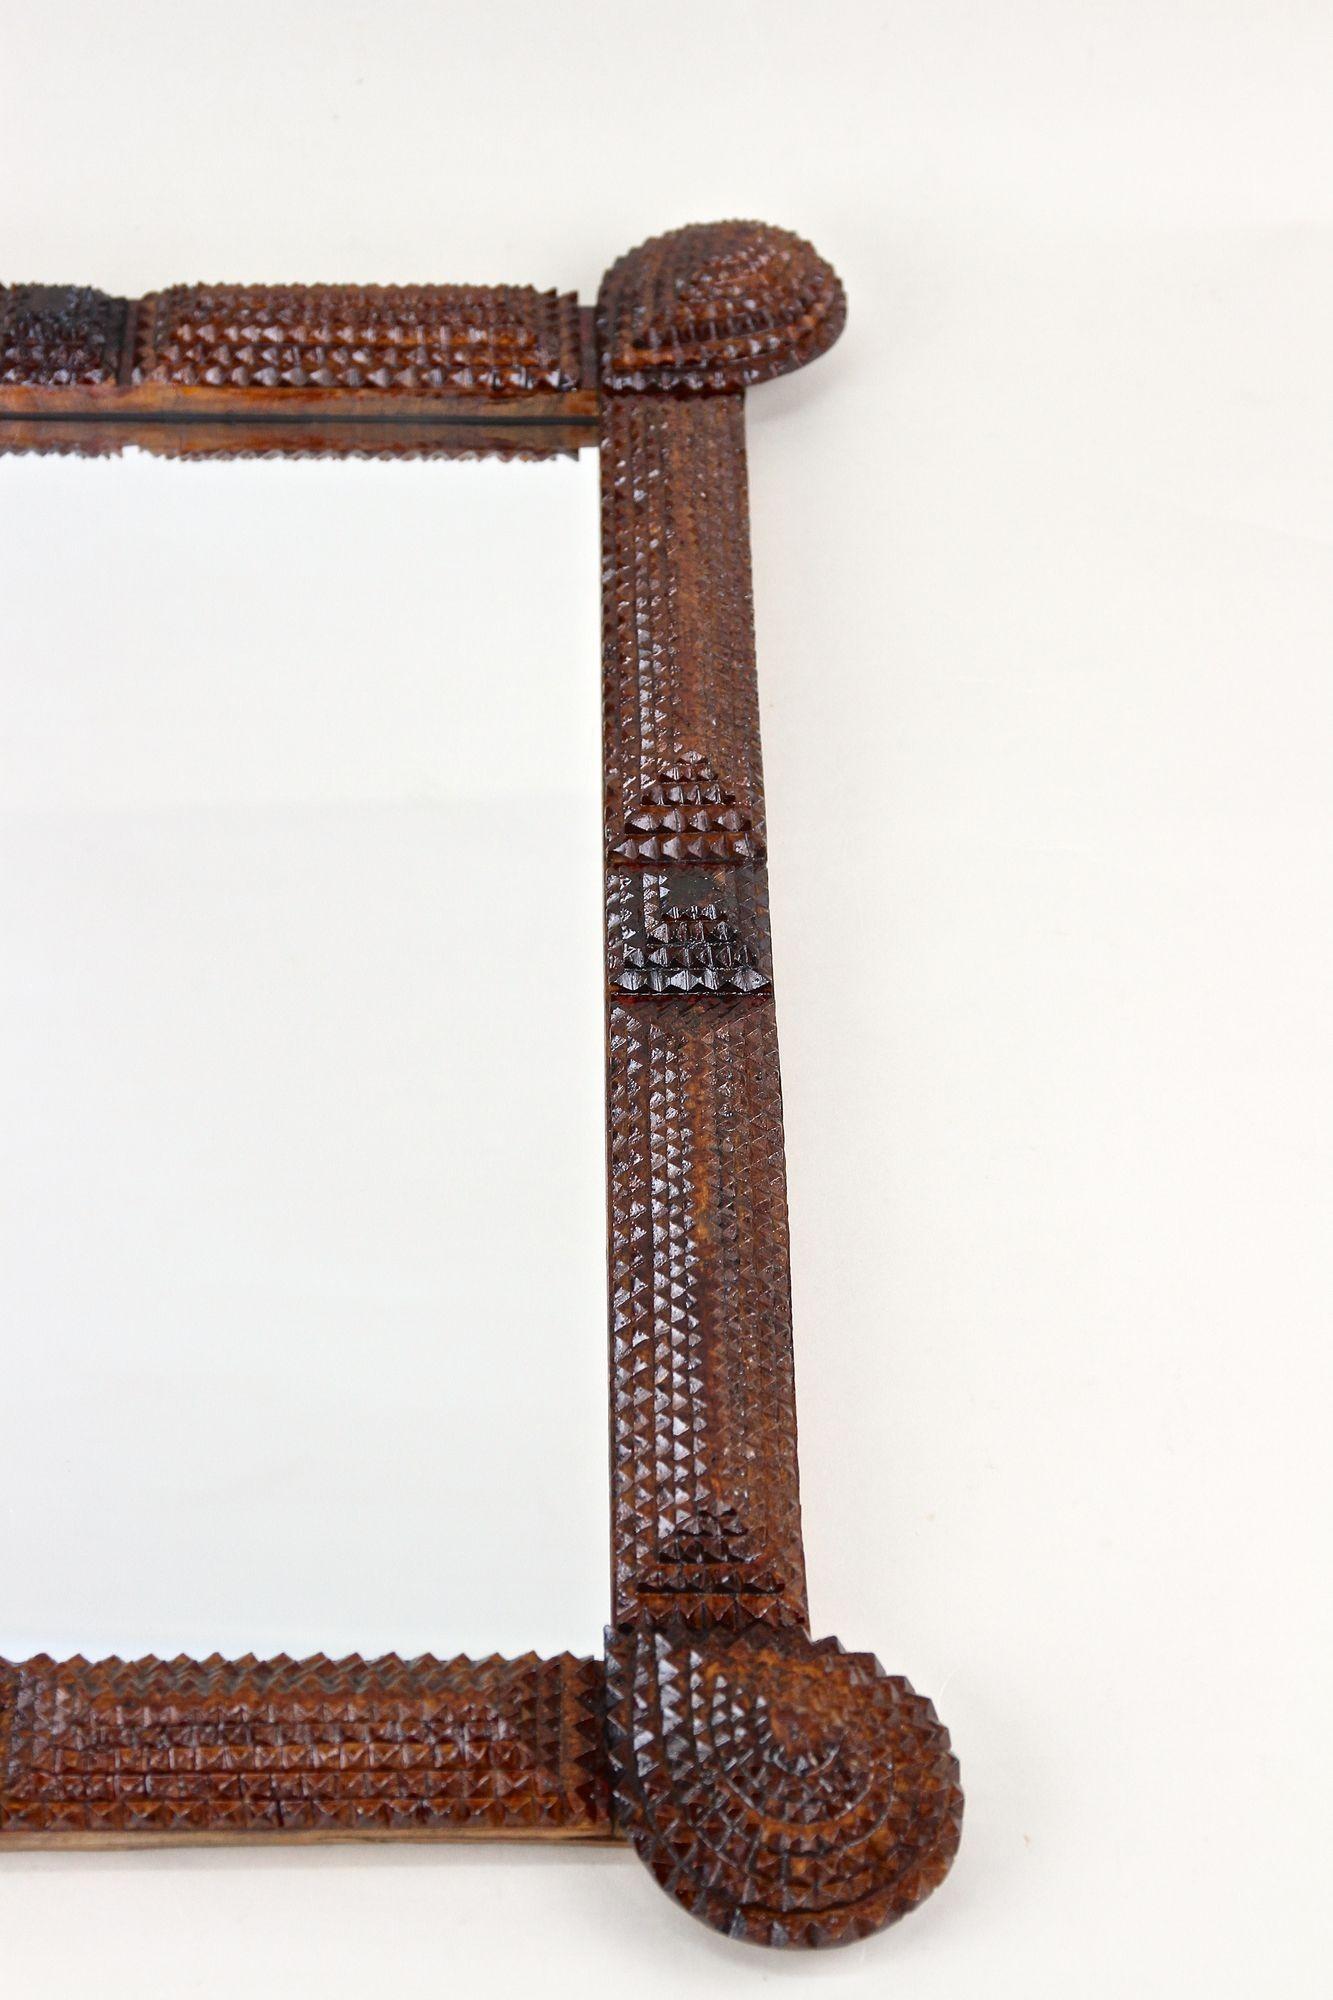 Rustic Tramp Art Wall Mirror With Unique Corners, Handcarved, Austria circa 1880 For Sale 4